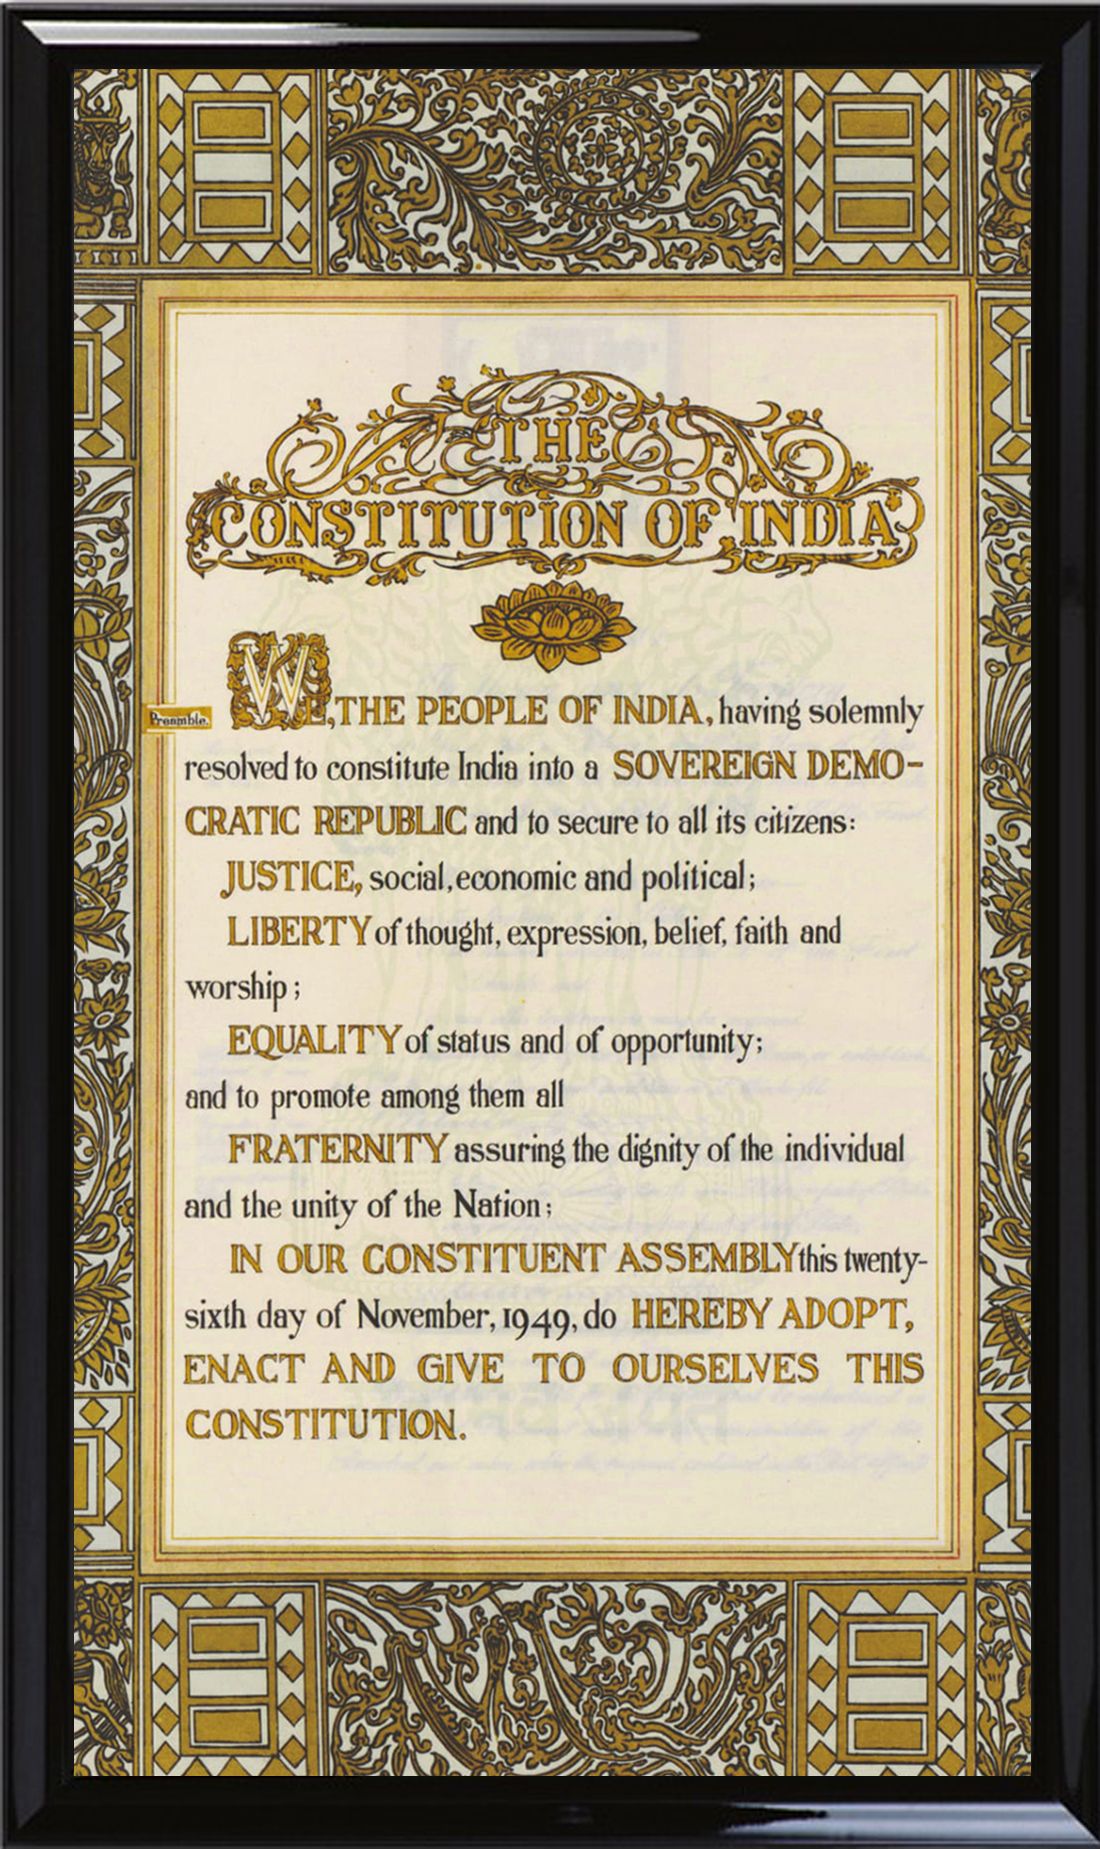 Most Popular Indian Constitution Preamble HD Image